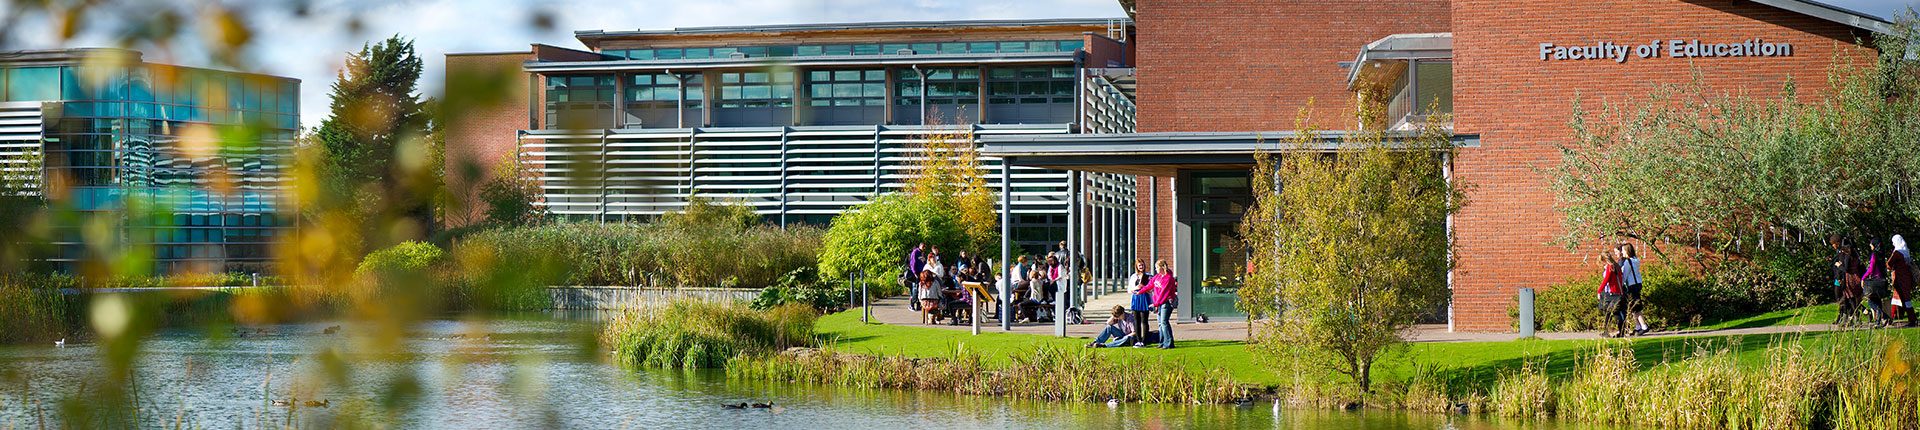 People sitting outside the faculty of education building, next to the lake